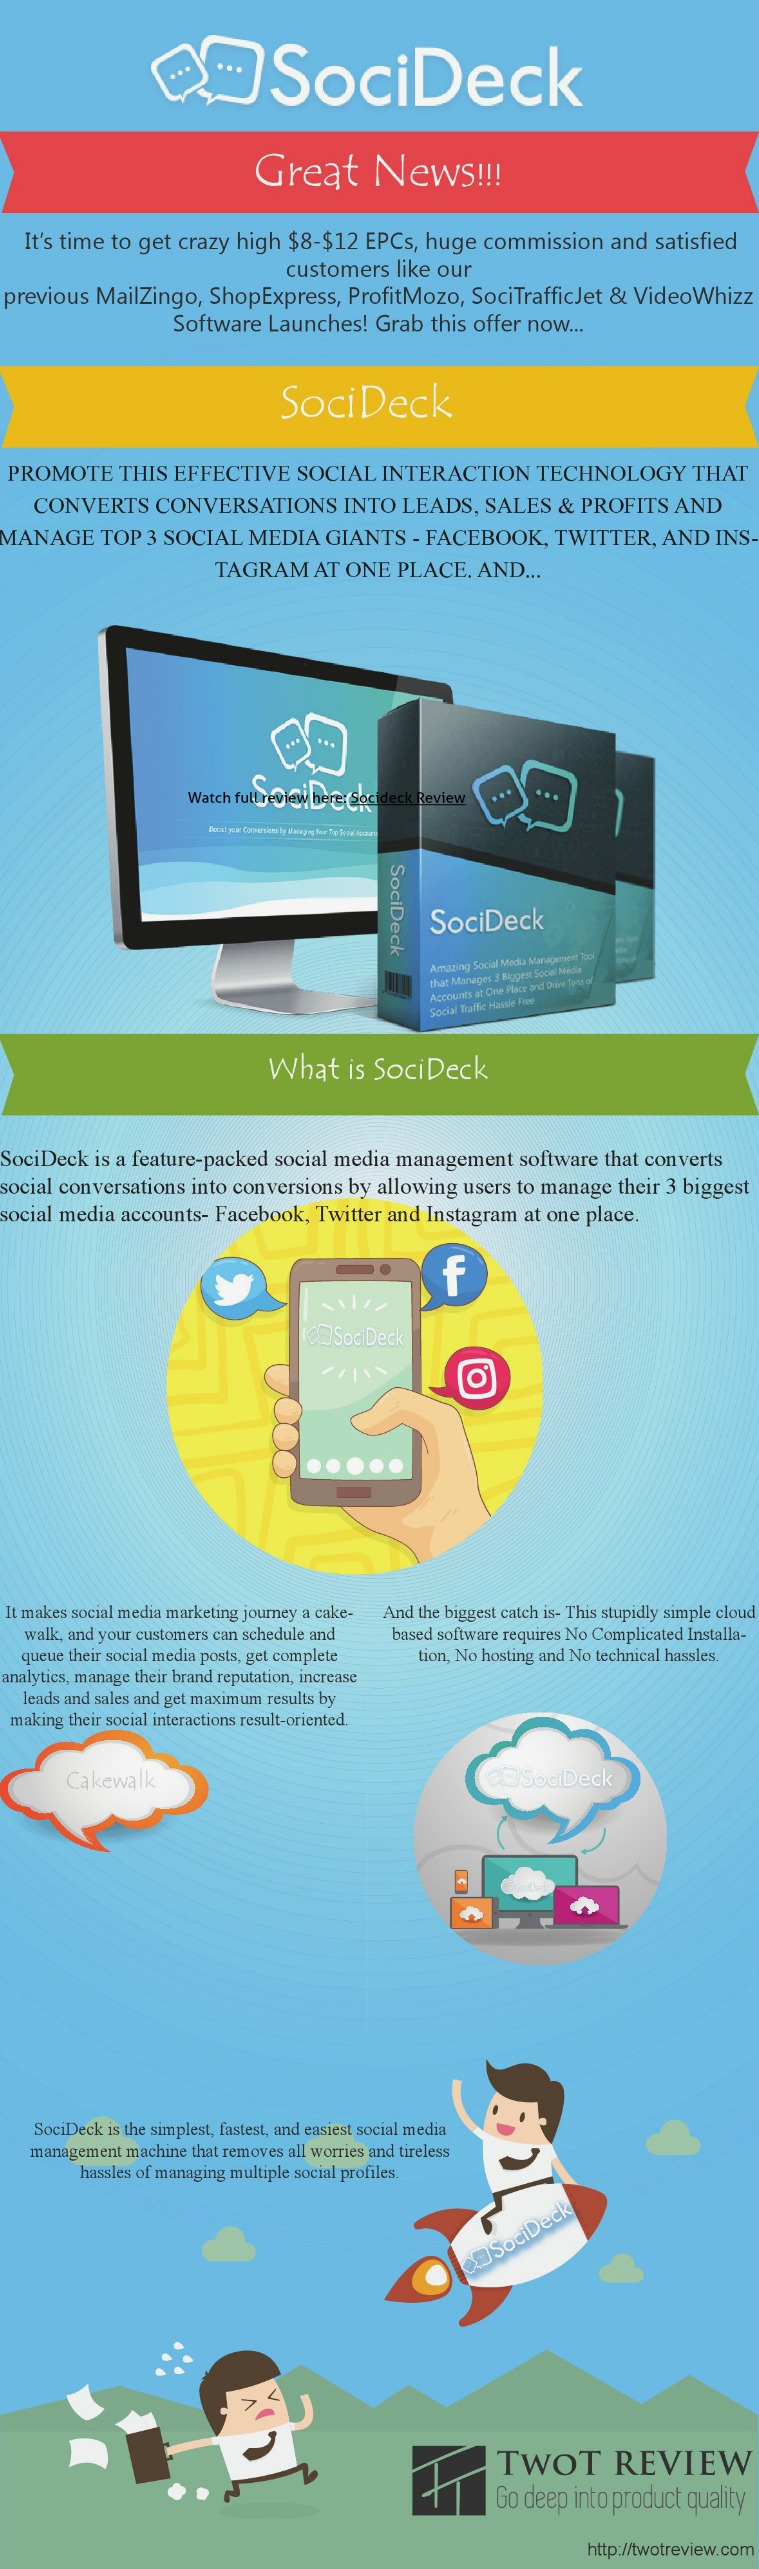 socideck review